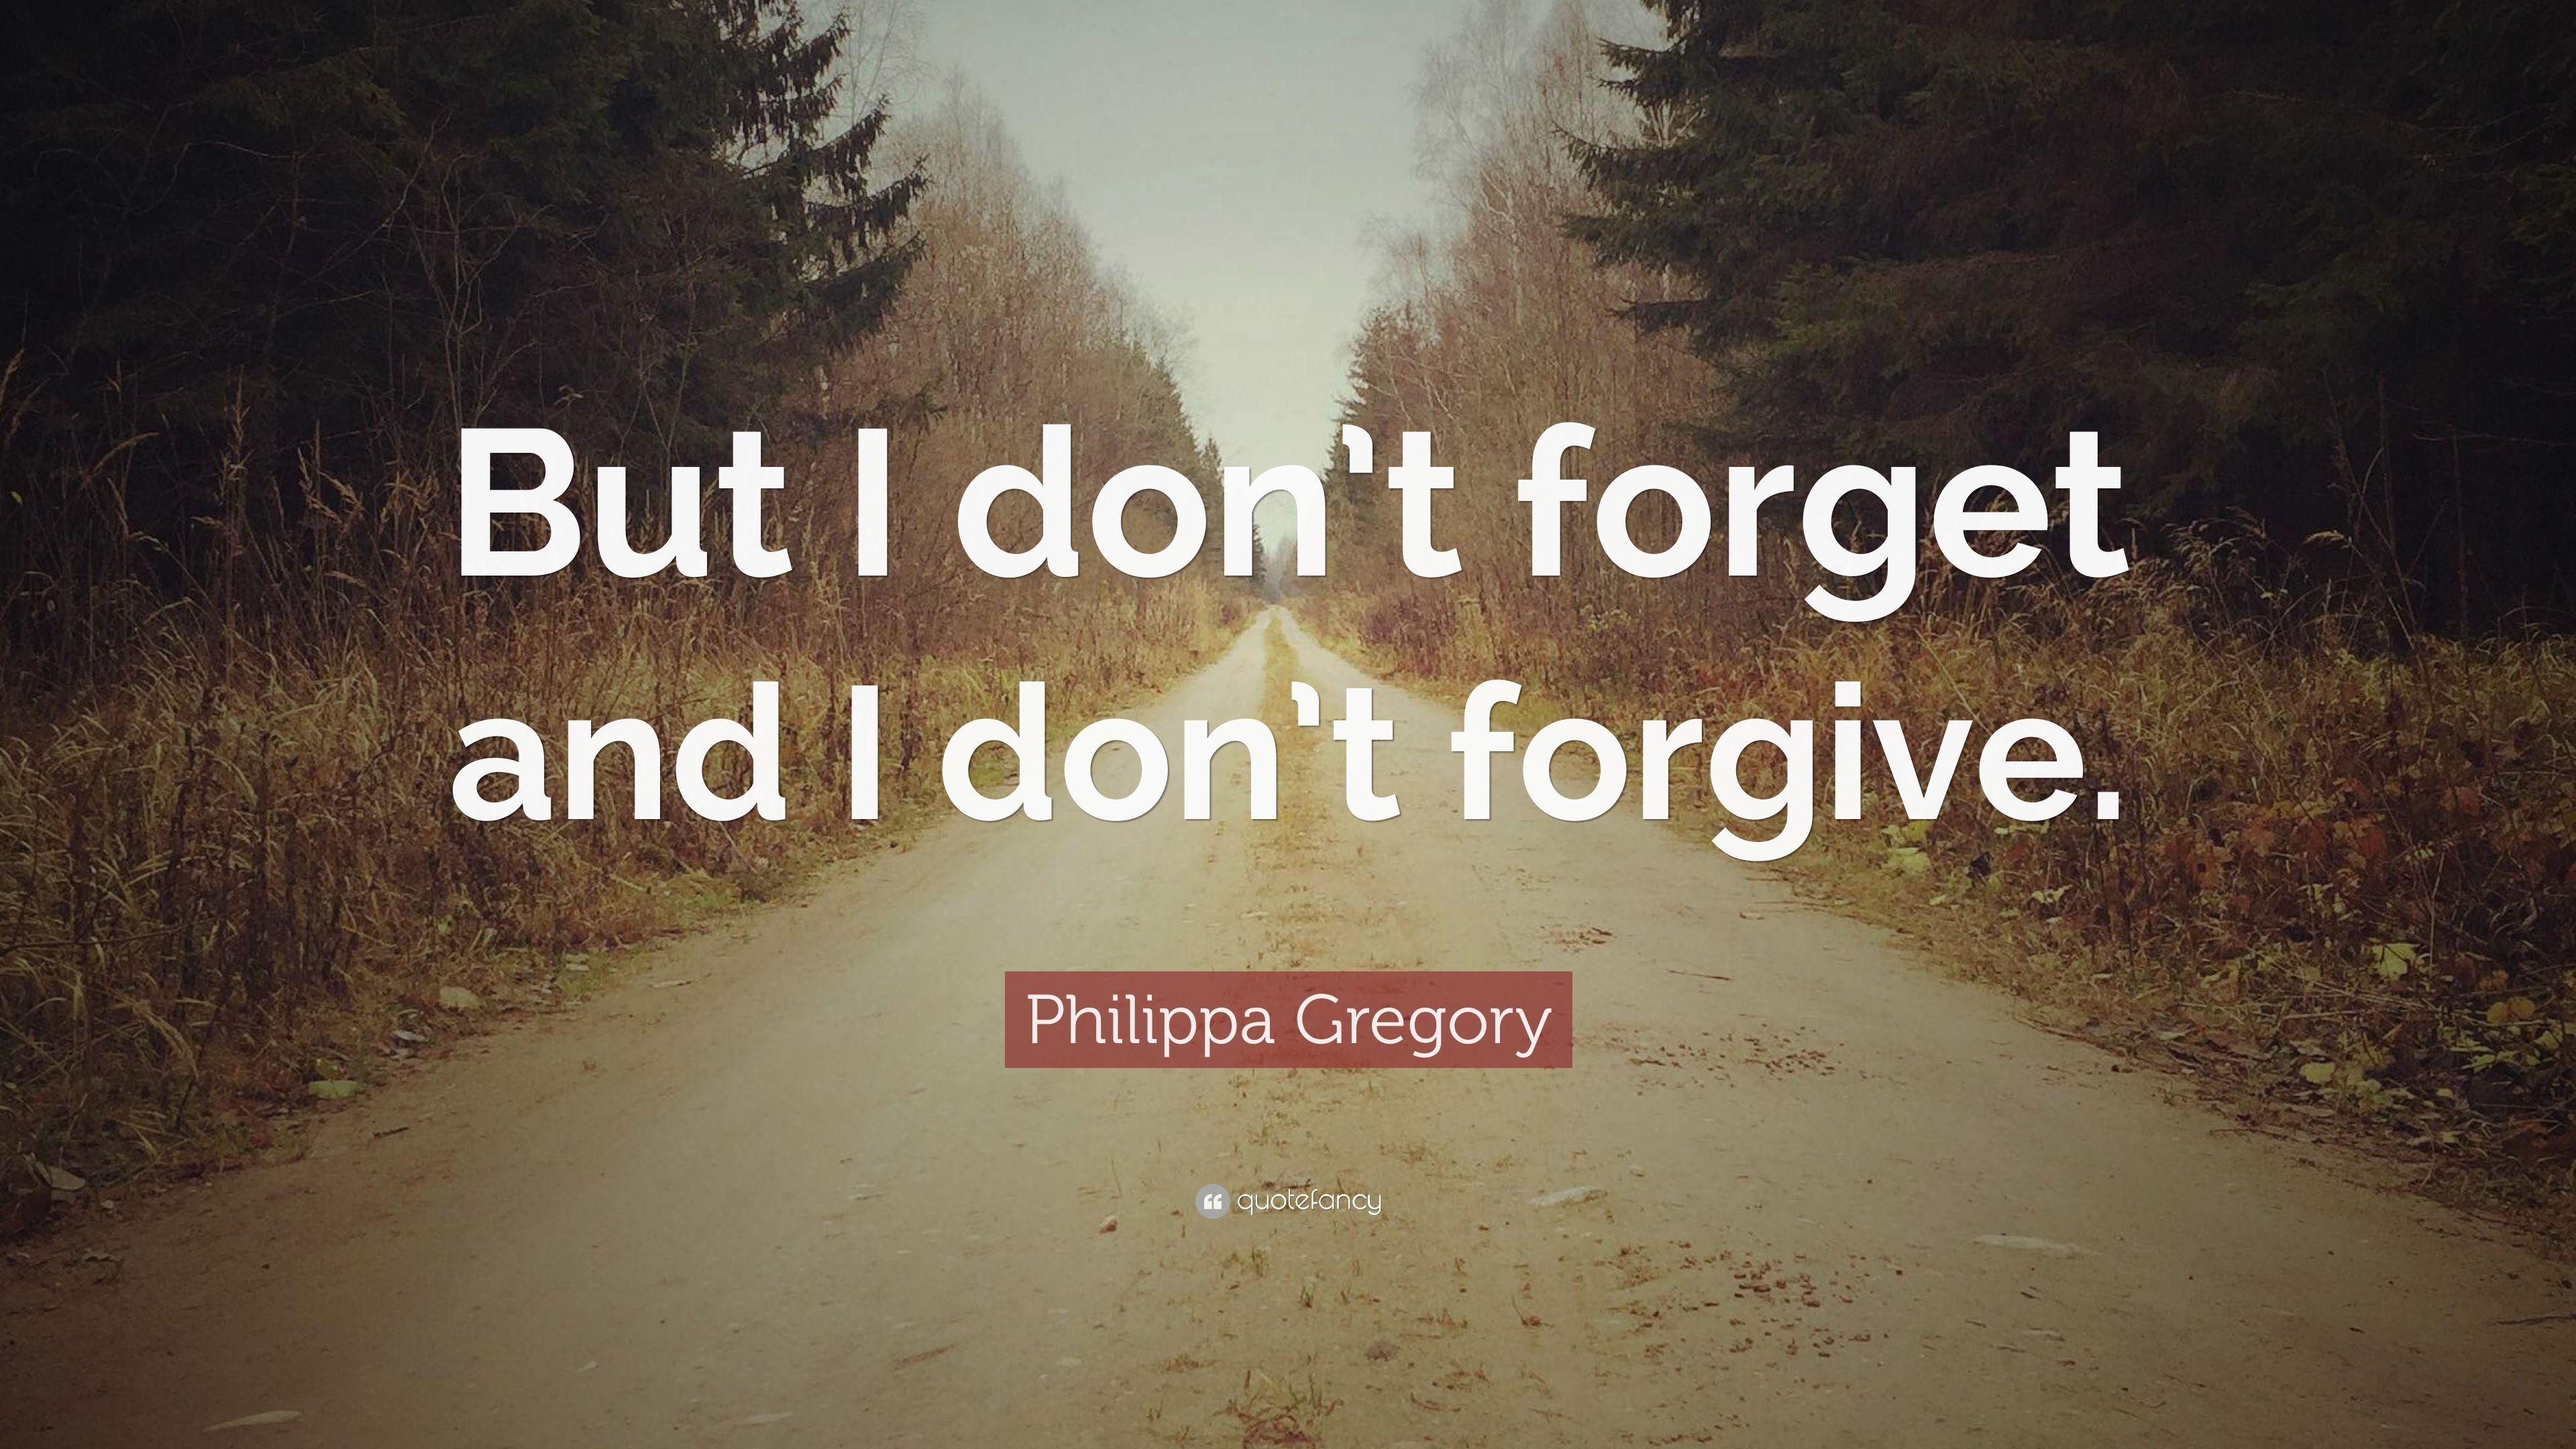 Philippa Gregory Quote: “But I don't forget and I don't forgive